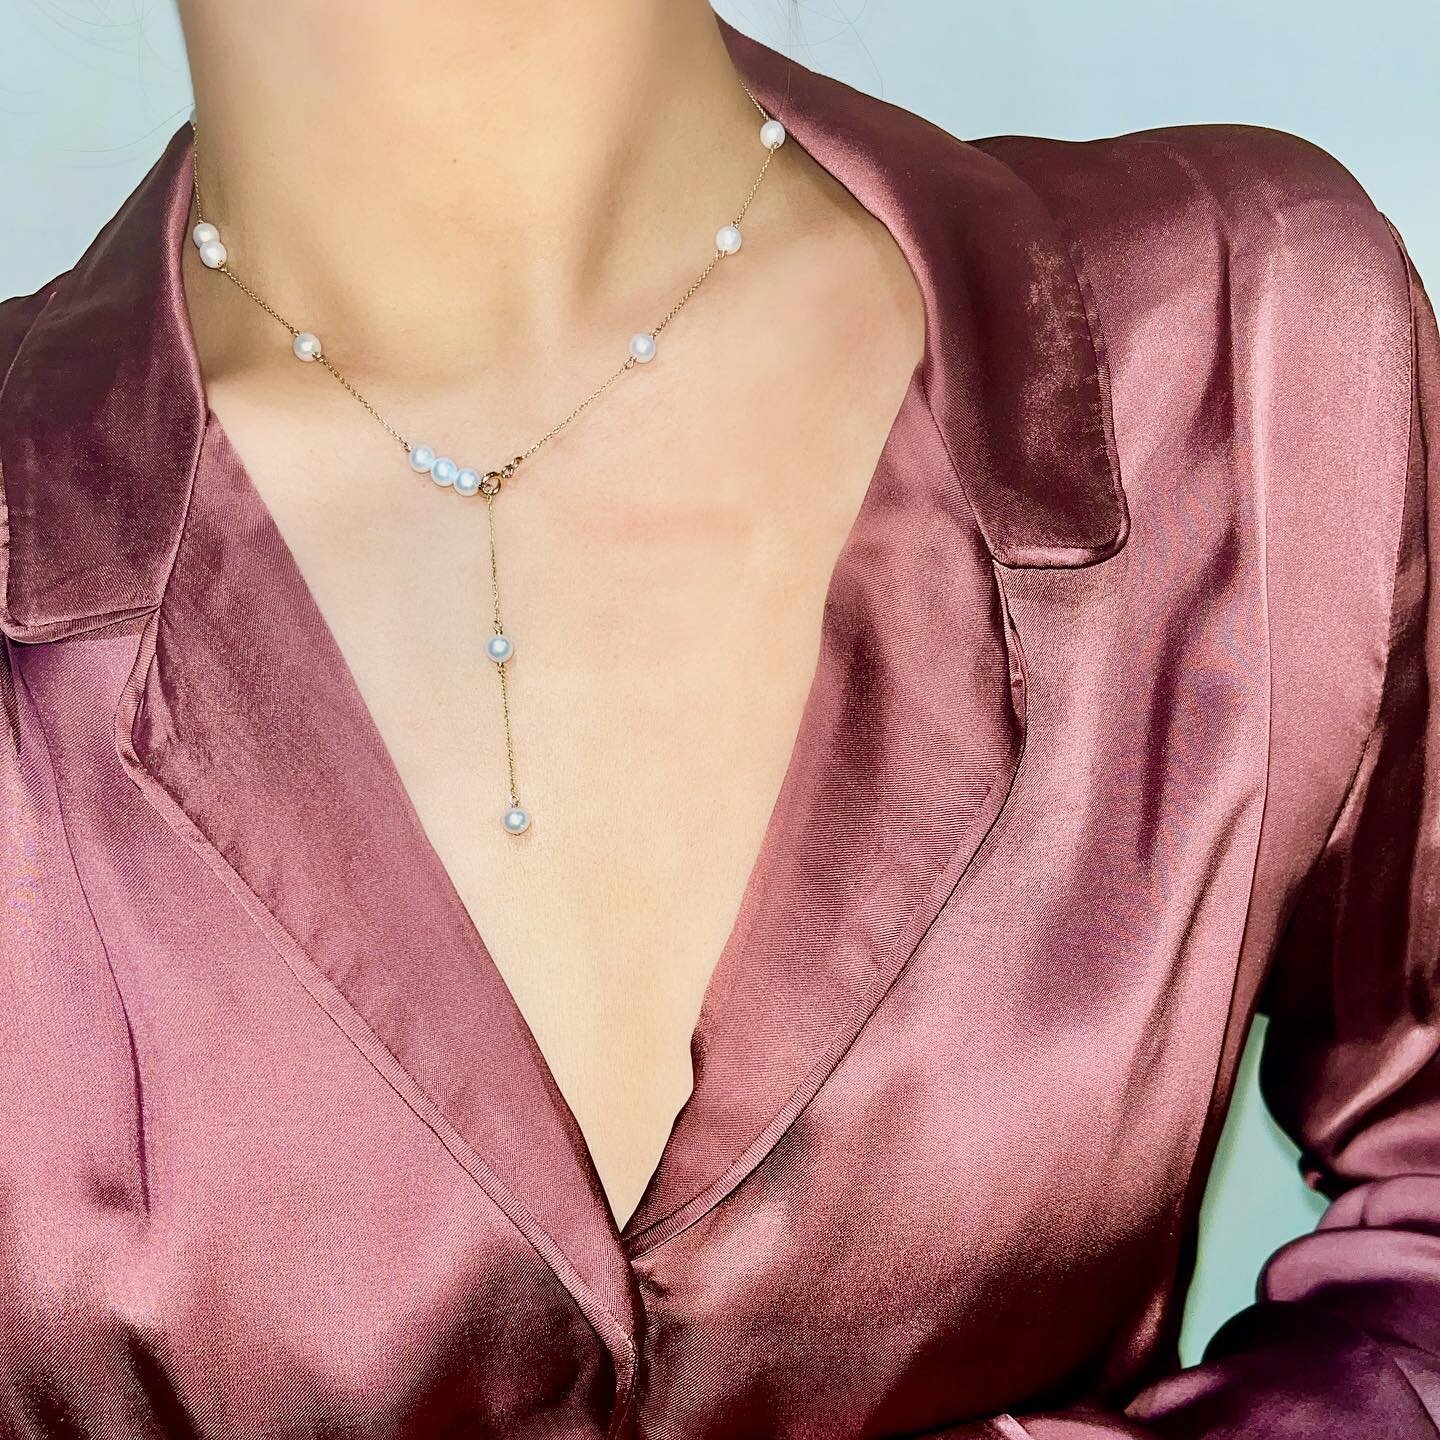 Pearl line station necklace adjustable length for different styling 🤍 

Now live on our website on our new Cosmos Collection ✨ - ready to ship 

@ouri_fine